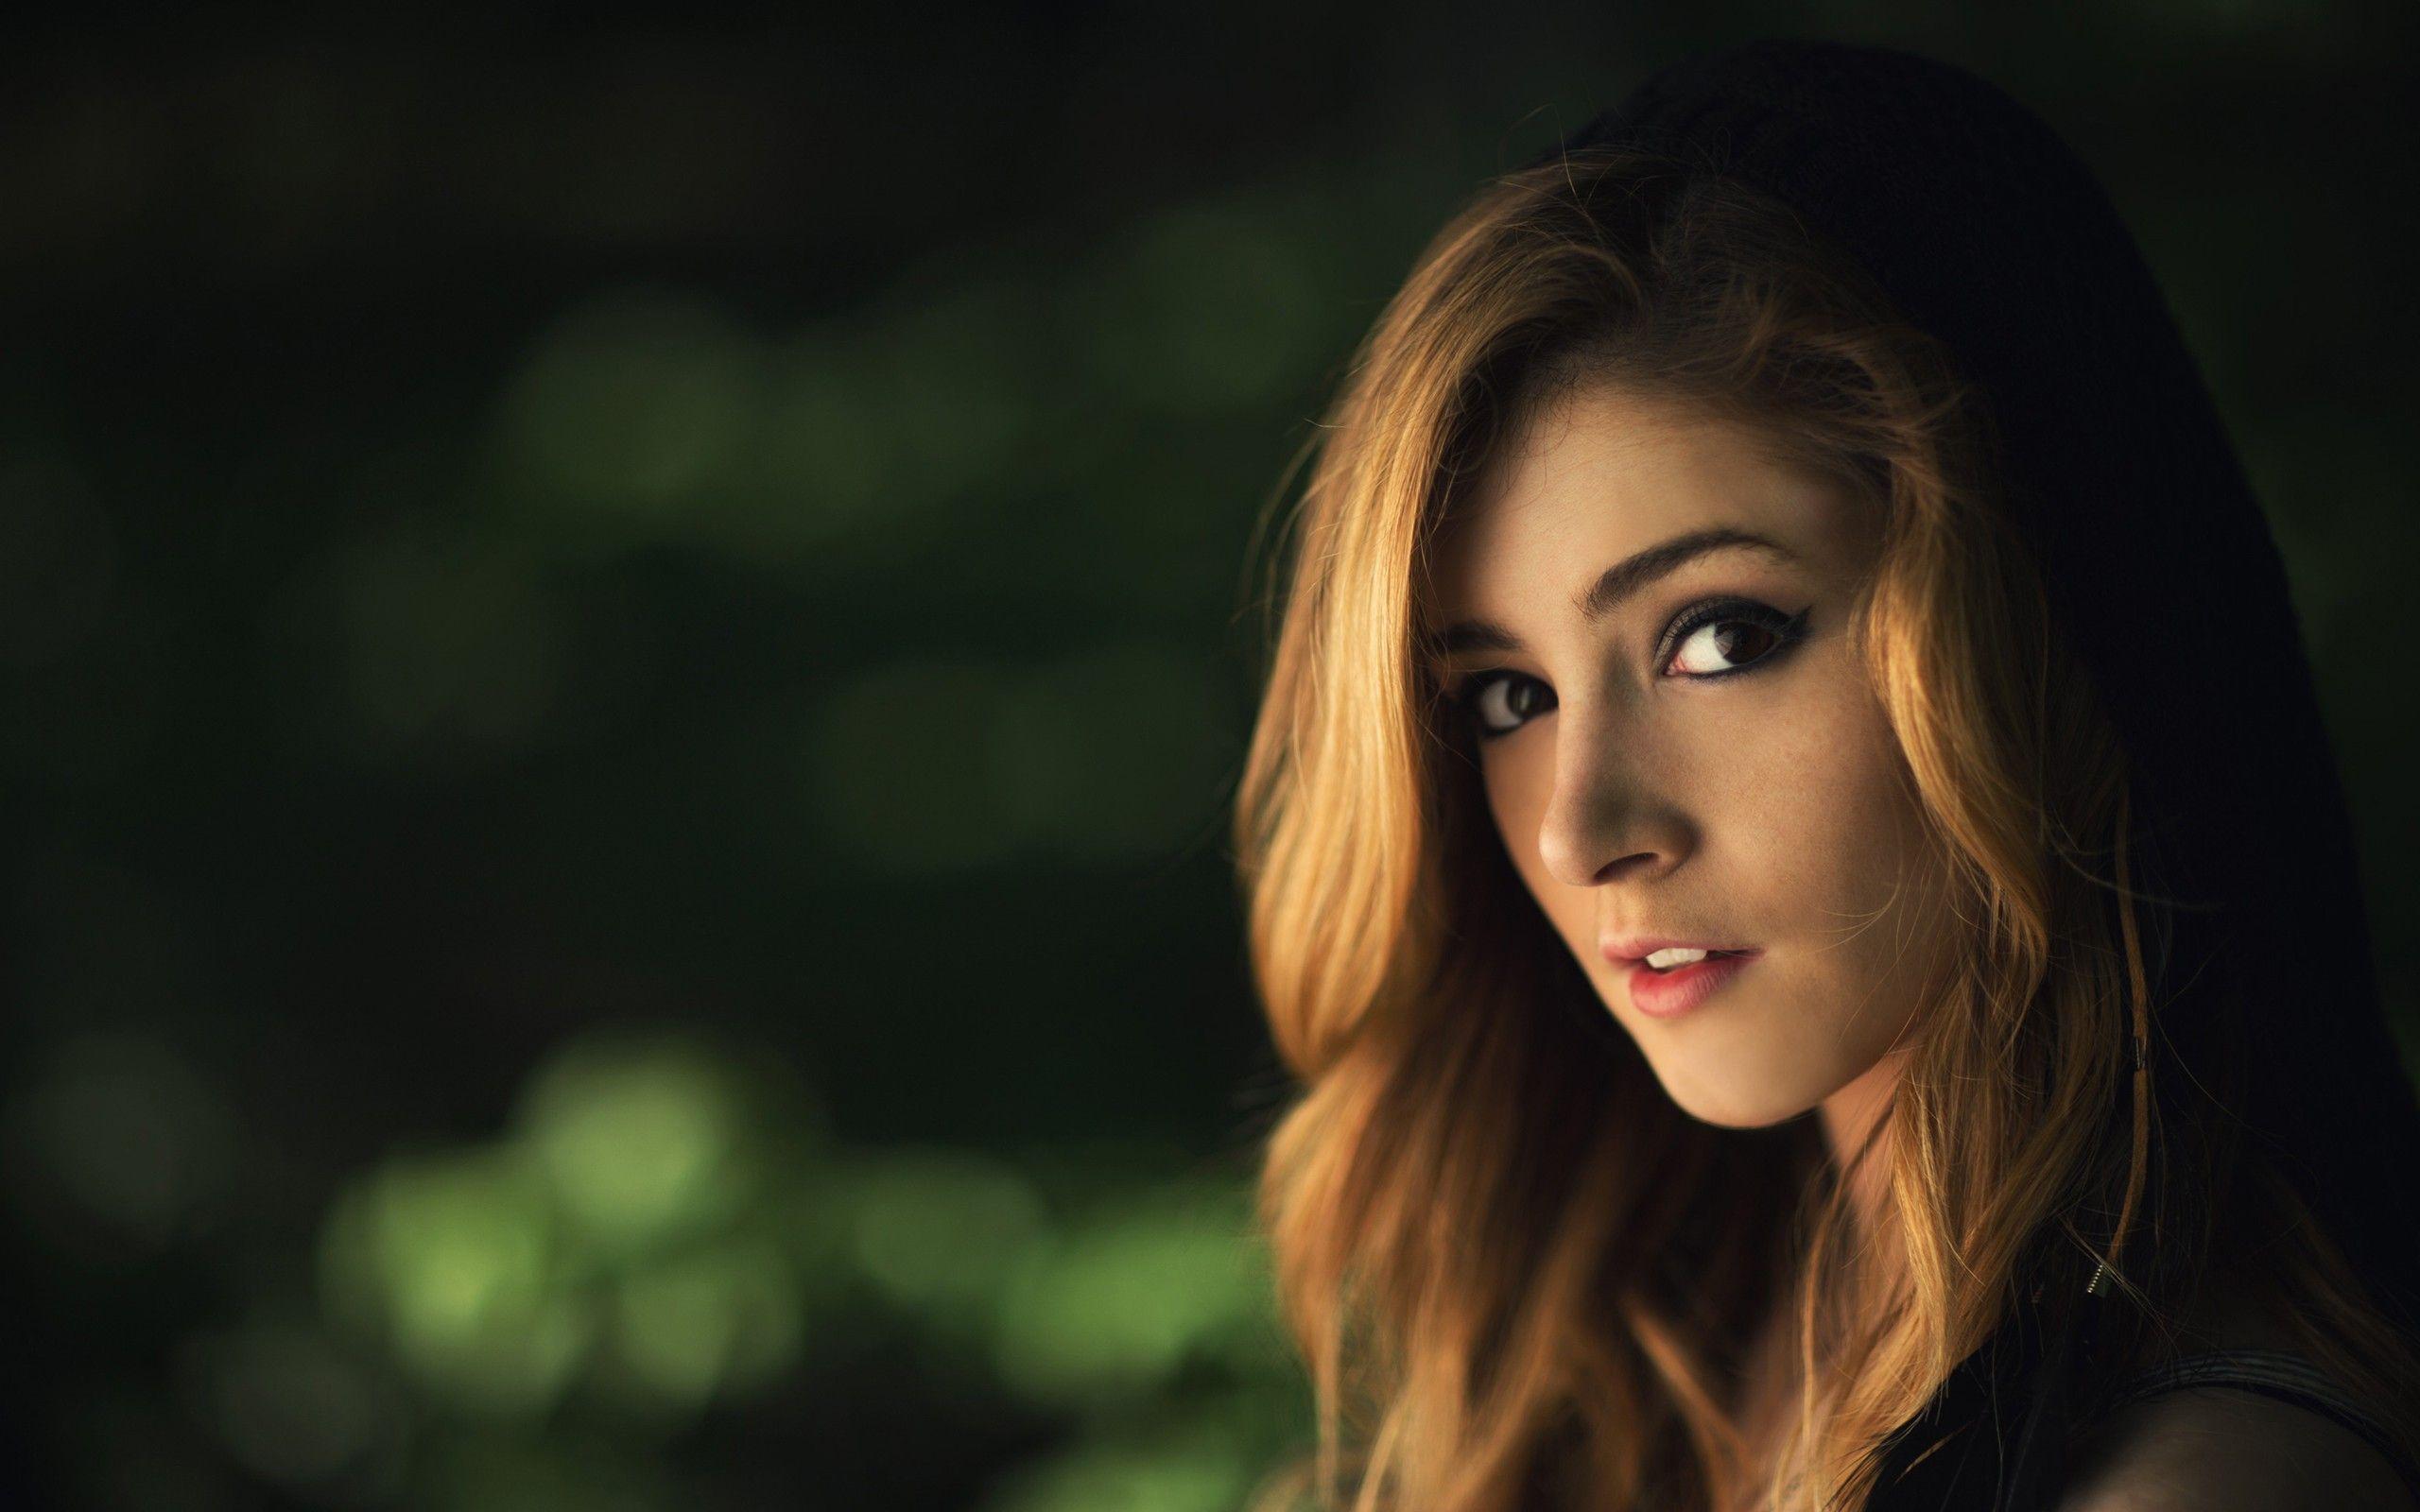 Download 2560x1600 Chrissy Costanza, singer, celebrity, Against